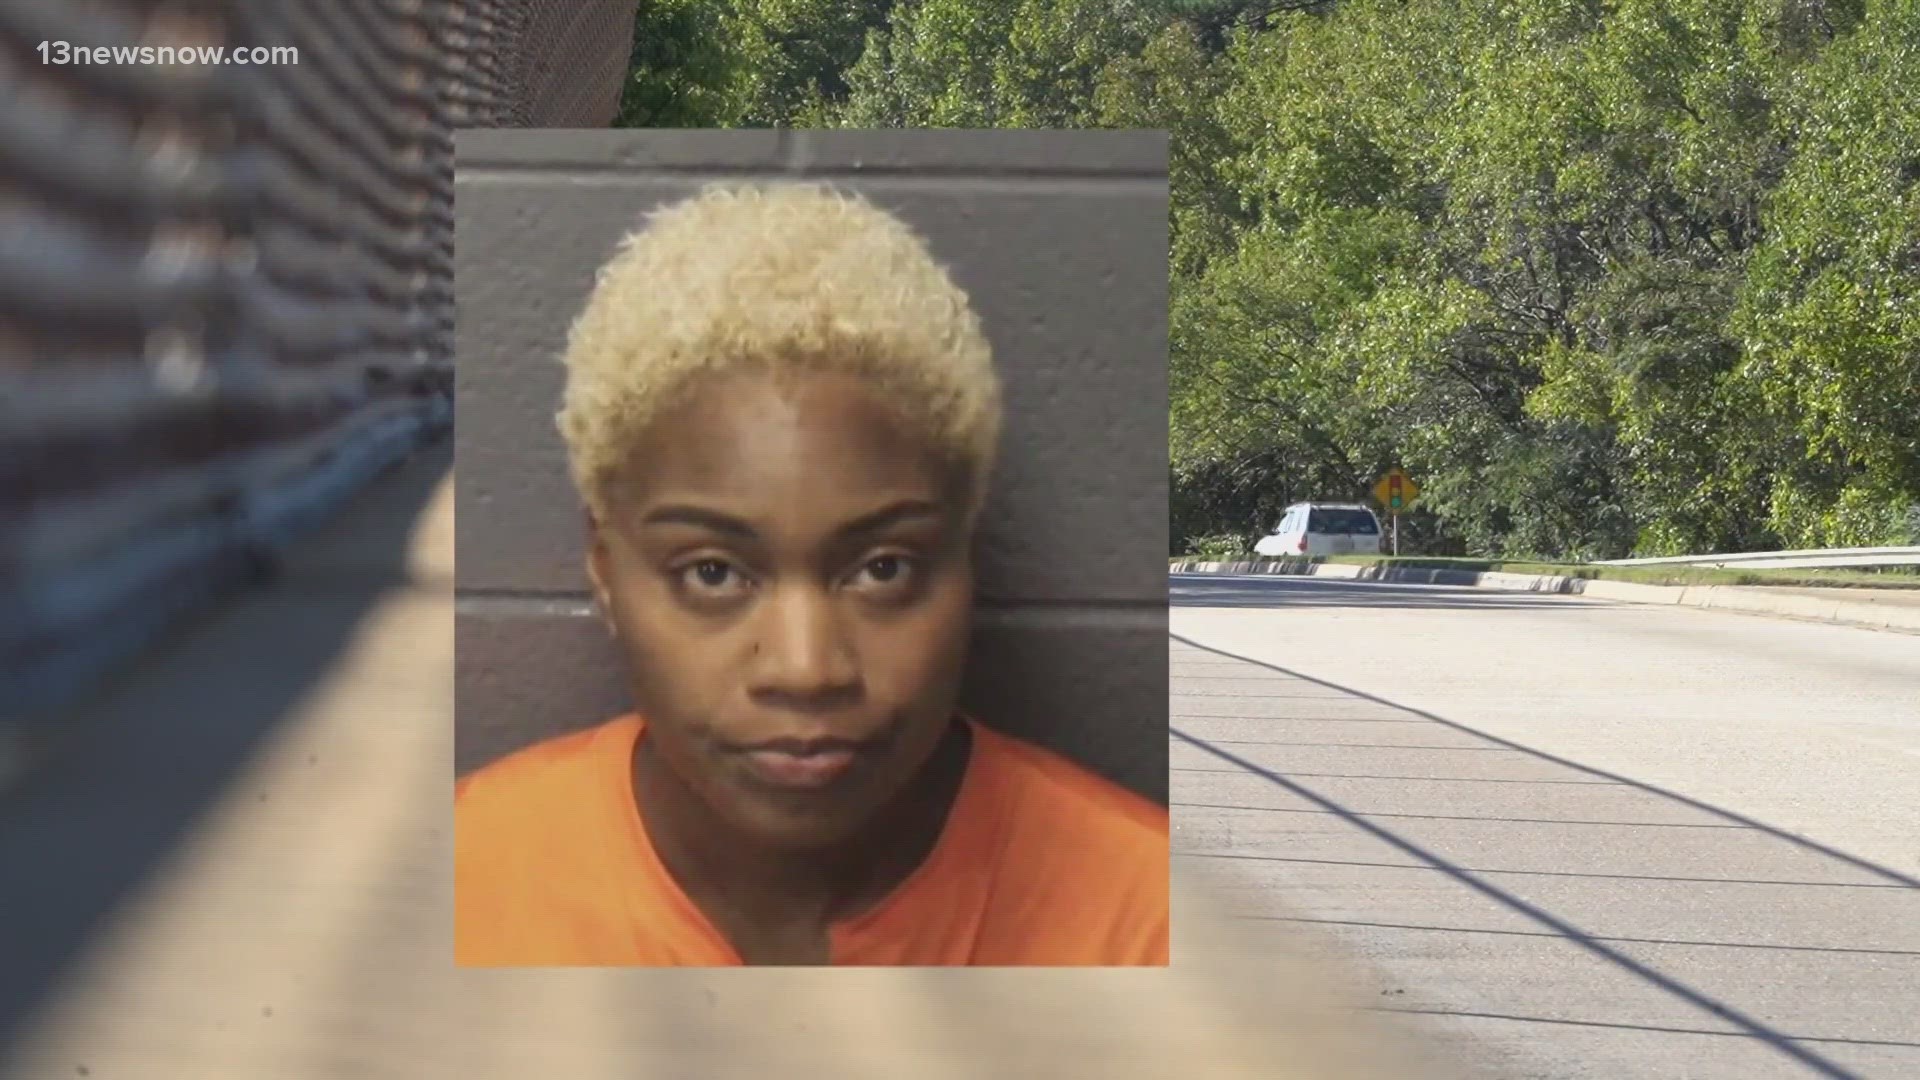 The woman accused of hitting and killing a VDOT contractor on Sunday appeared in a Hampton courtroom for the first time this morning.